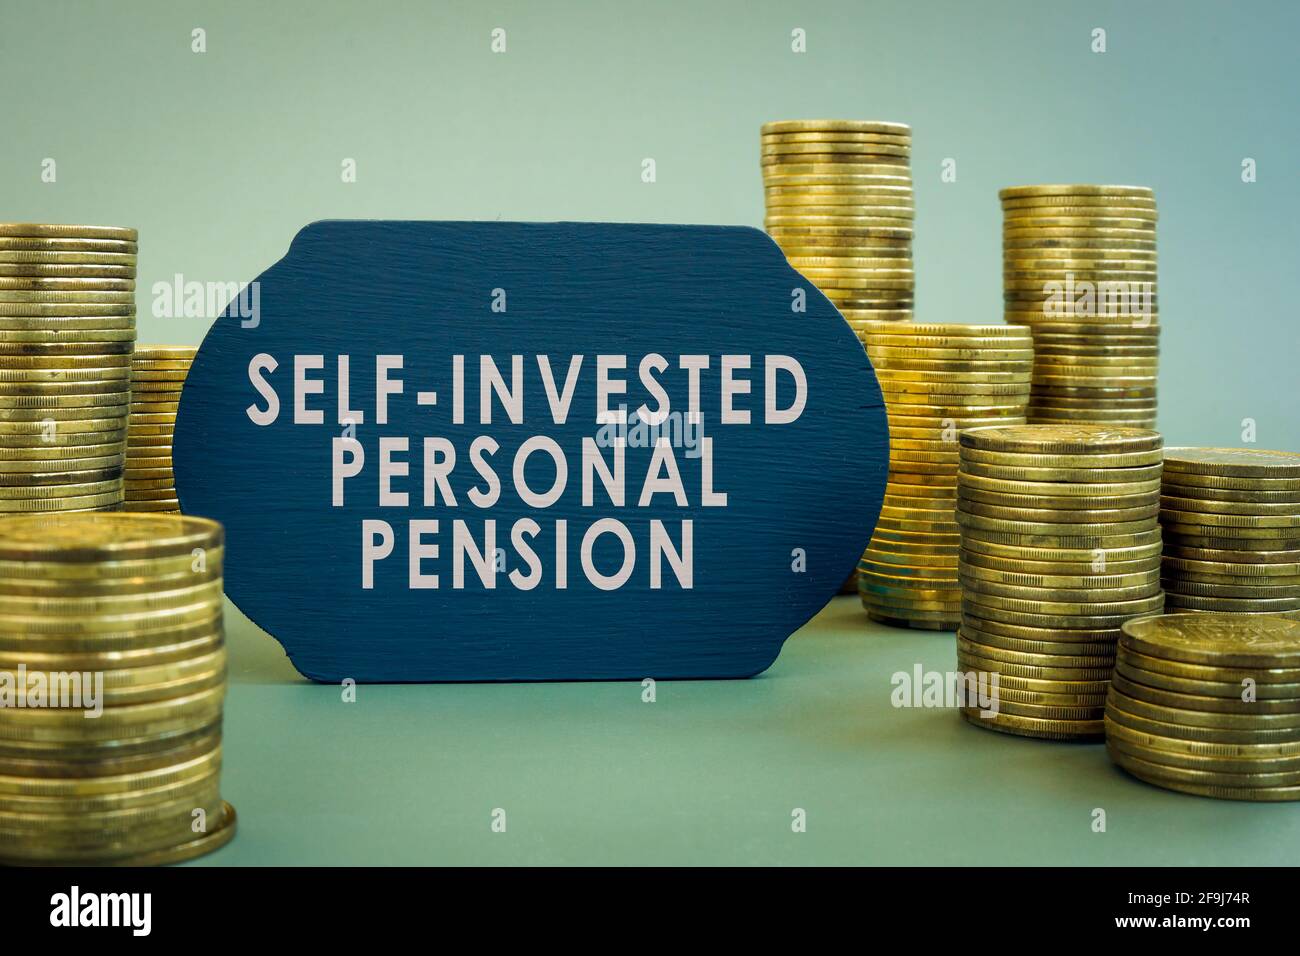 Self-Invested Personal Pension SIPP words on the black plate. Stock Photo